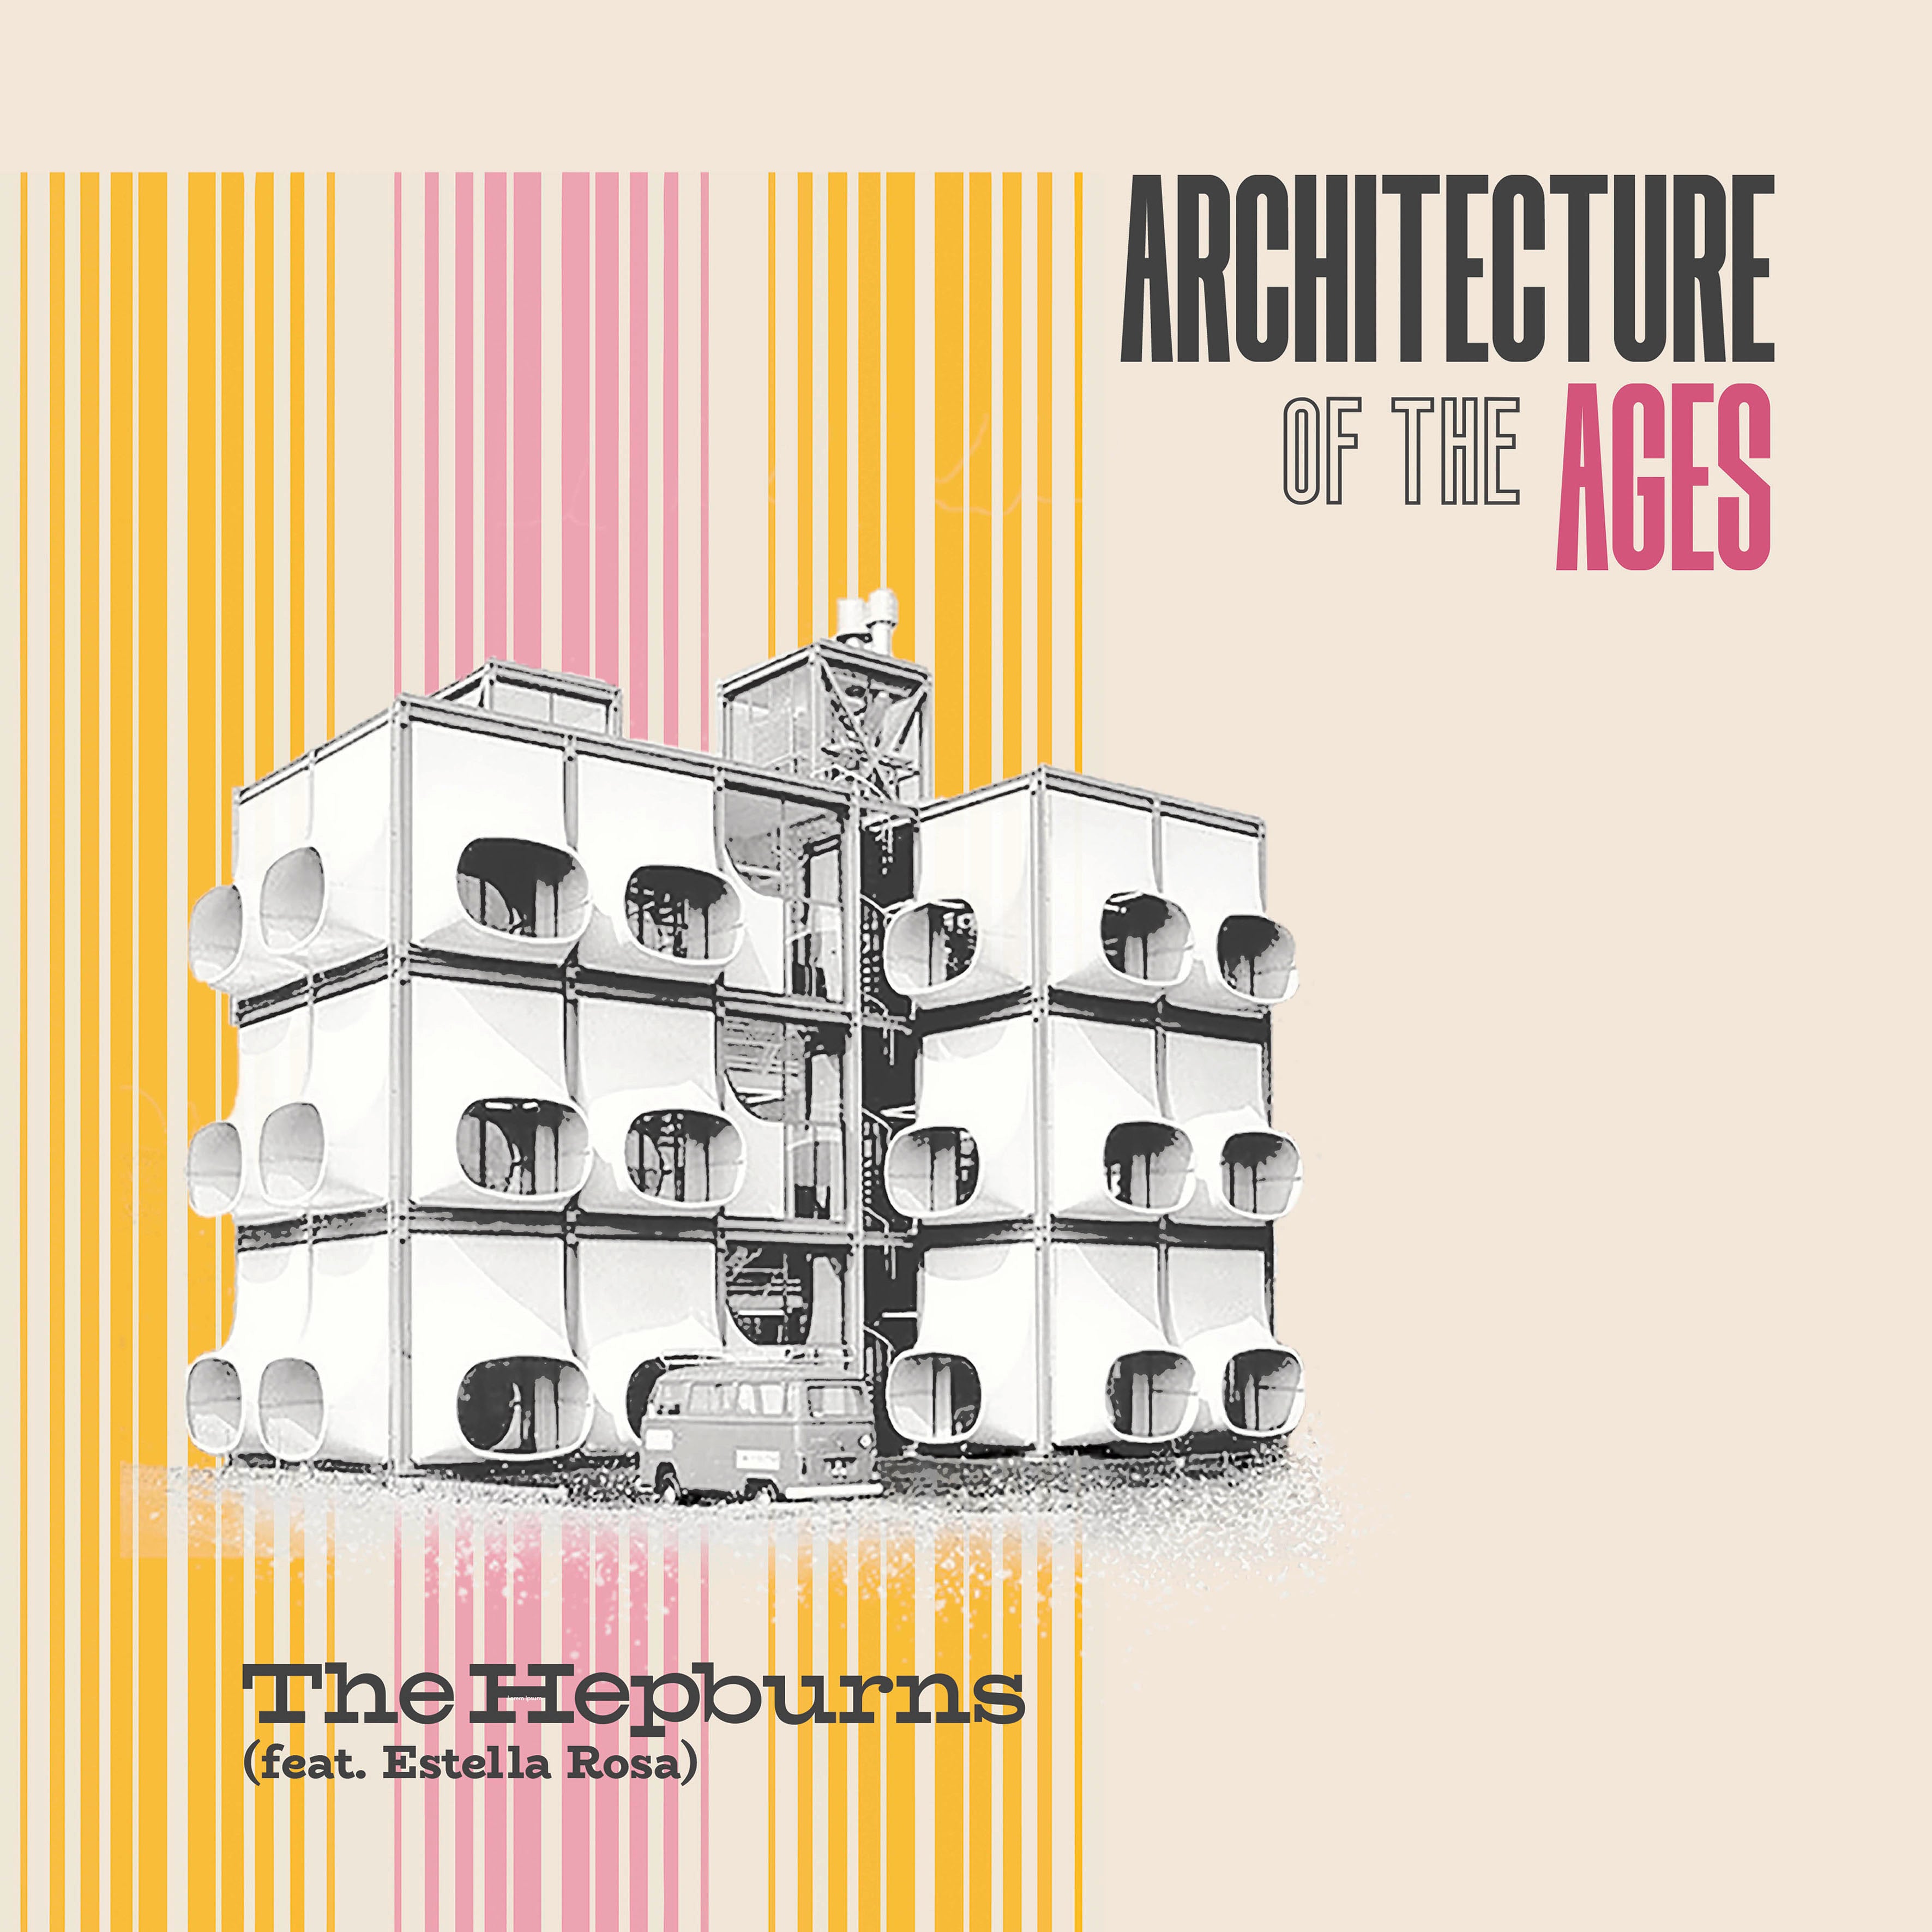 Hepburns, The (ft. Estella Rosa) - Architecture of the Ages